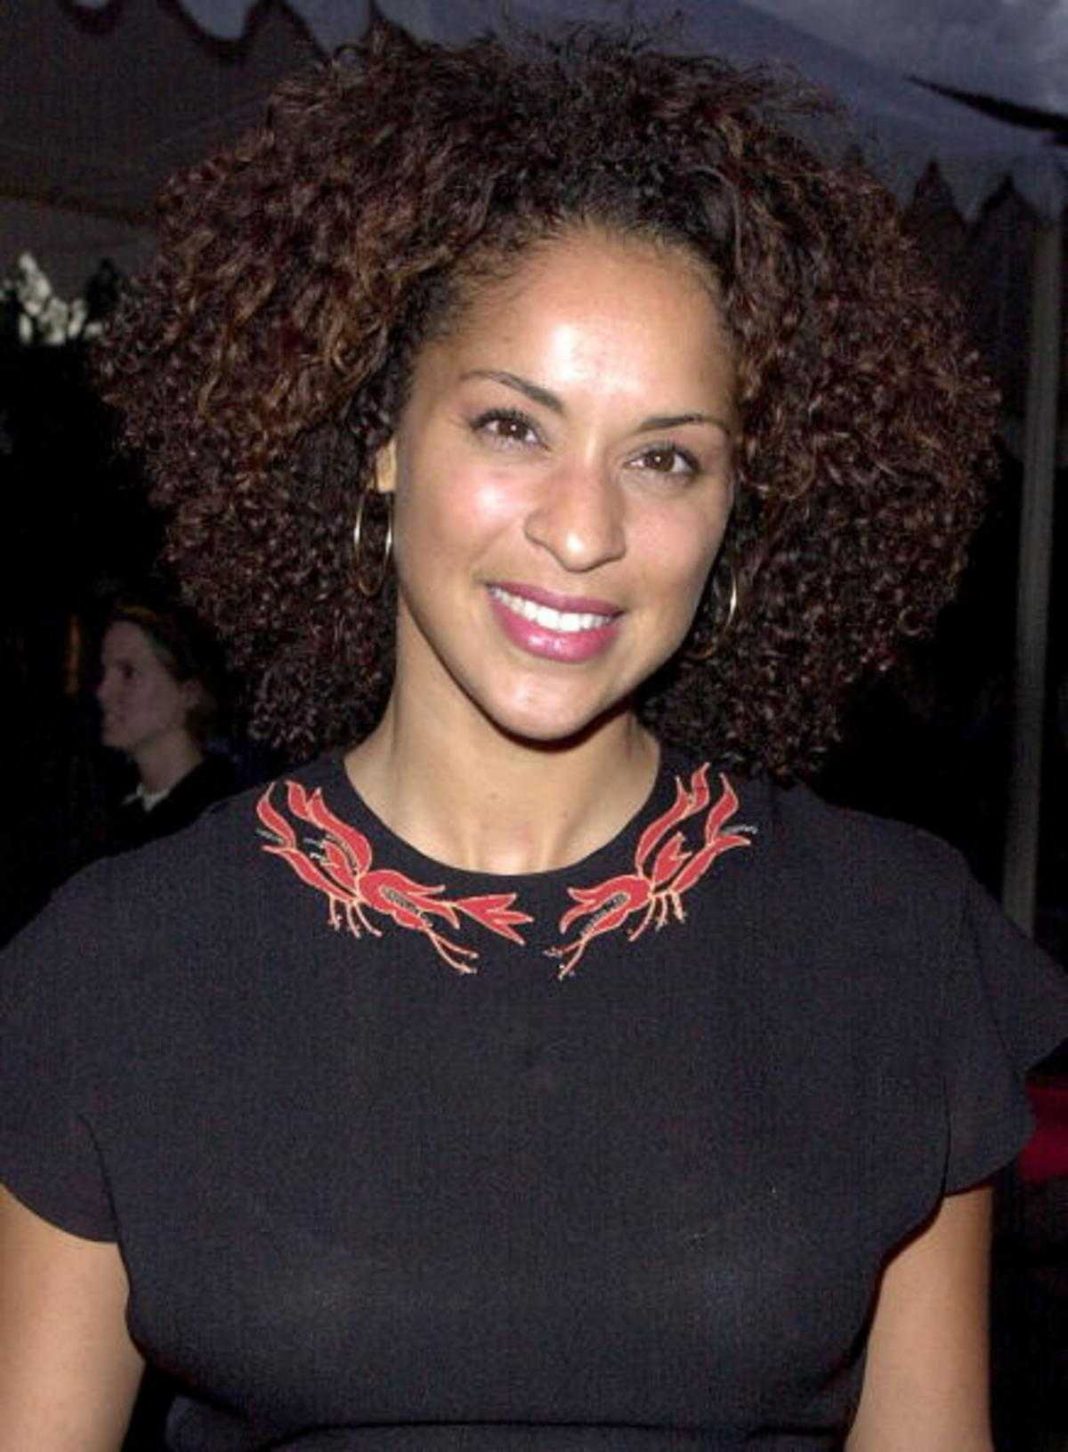 40 Karyn Parsons Nude Pictures Flaunt Her Diva Like Looks 219